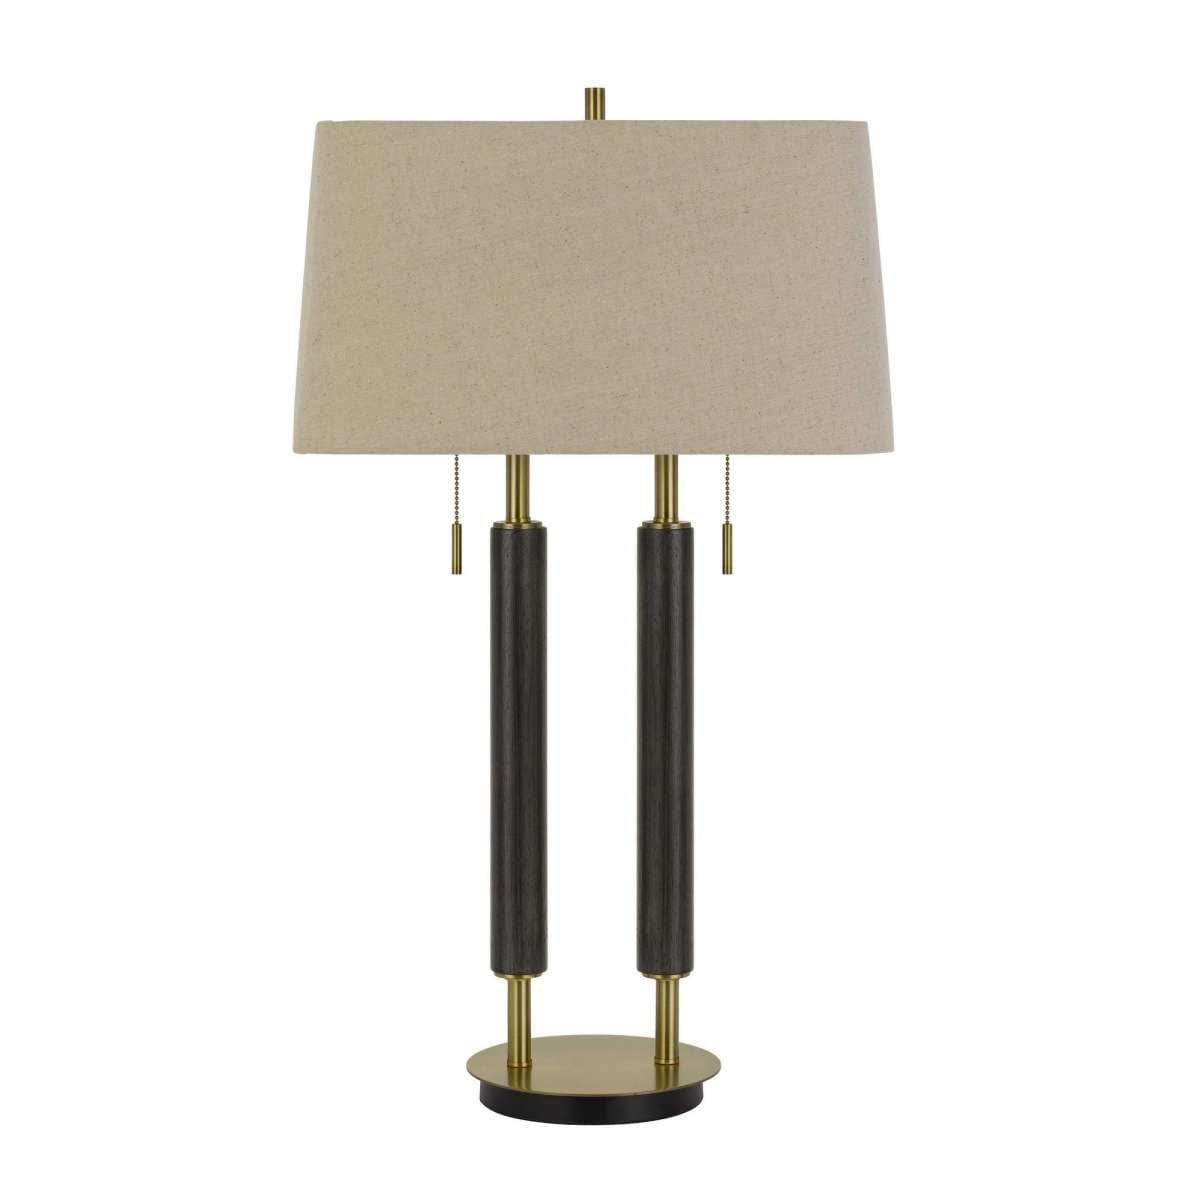 Benzara 32" Metal And Wood Desk Lamp With Two Light Setup, Brown And Gold By Benzara Table Lamps BM233475